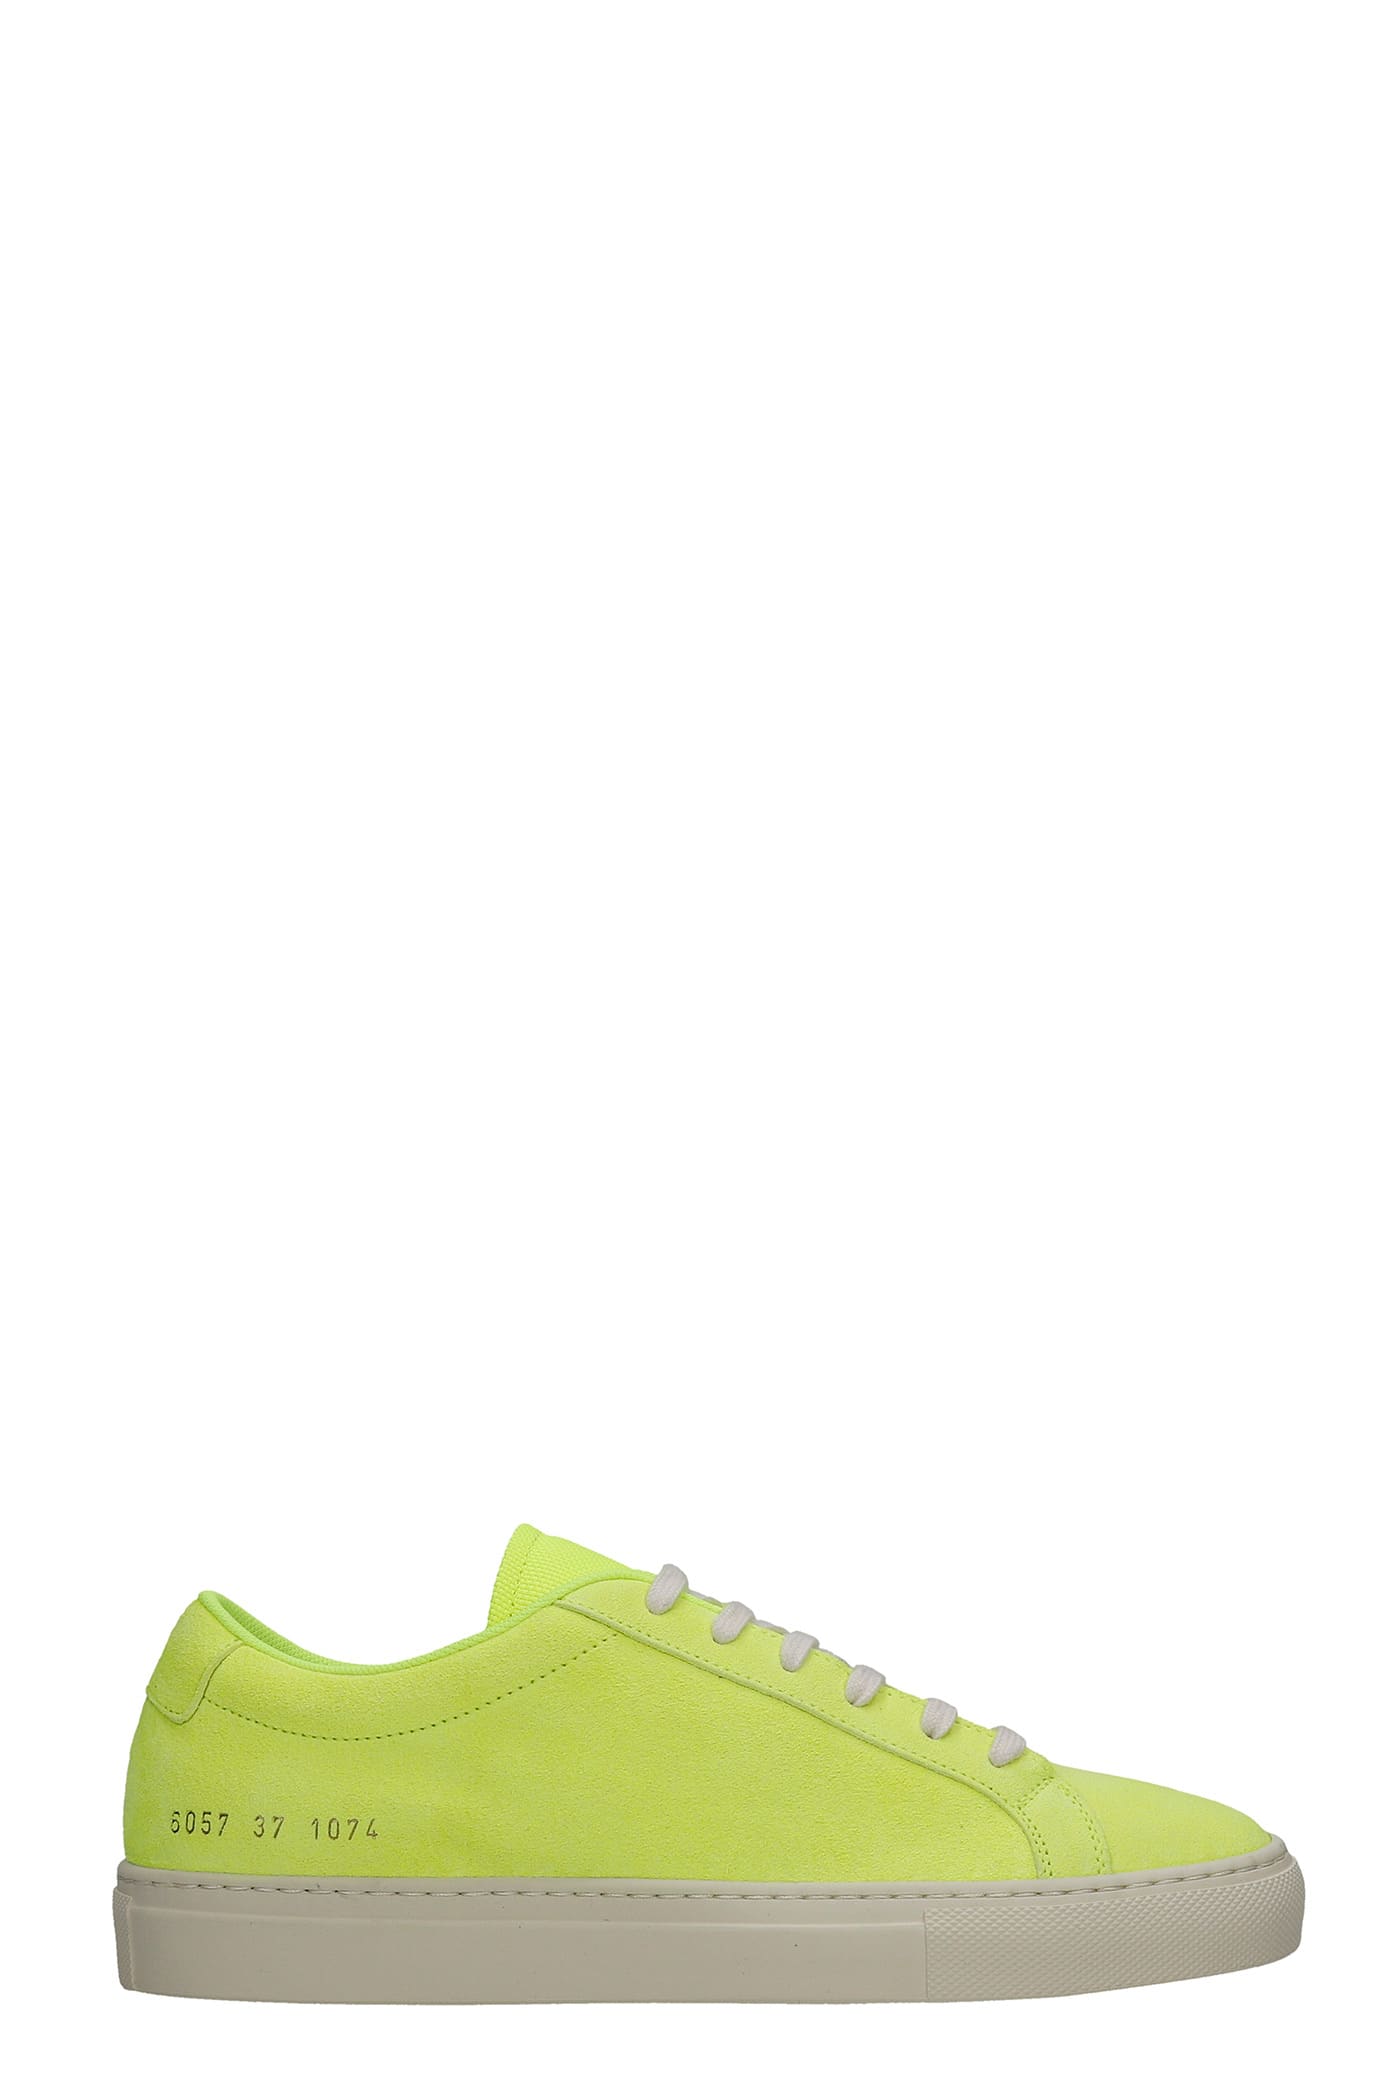 COMMON PROJECTS ACHILLE FLUO trainers IN YELLOW SUEDE,60571074